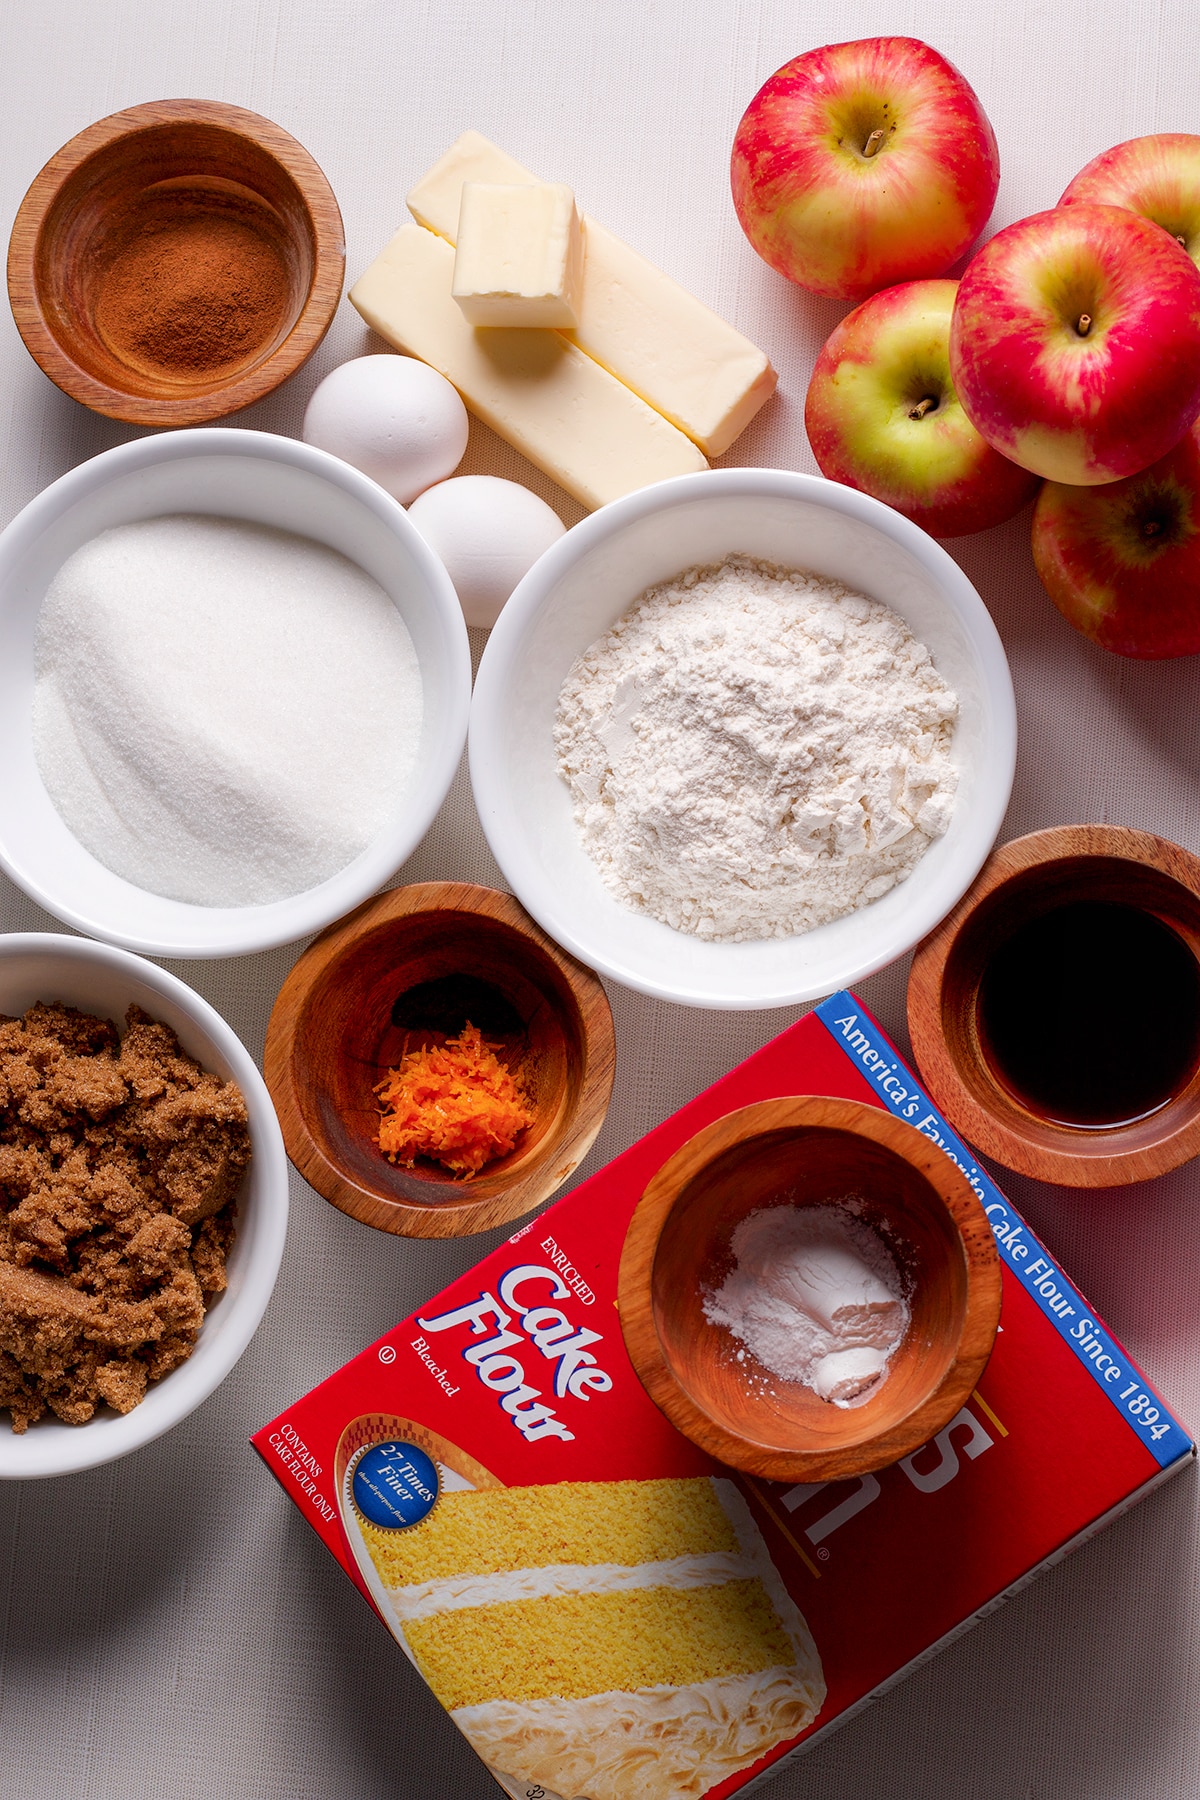 All of the ingredients needed to make French Apple Crumb Cake displayed on a white countertop.